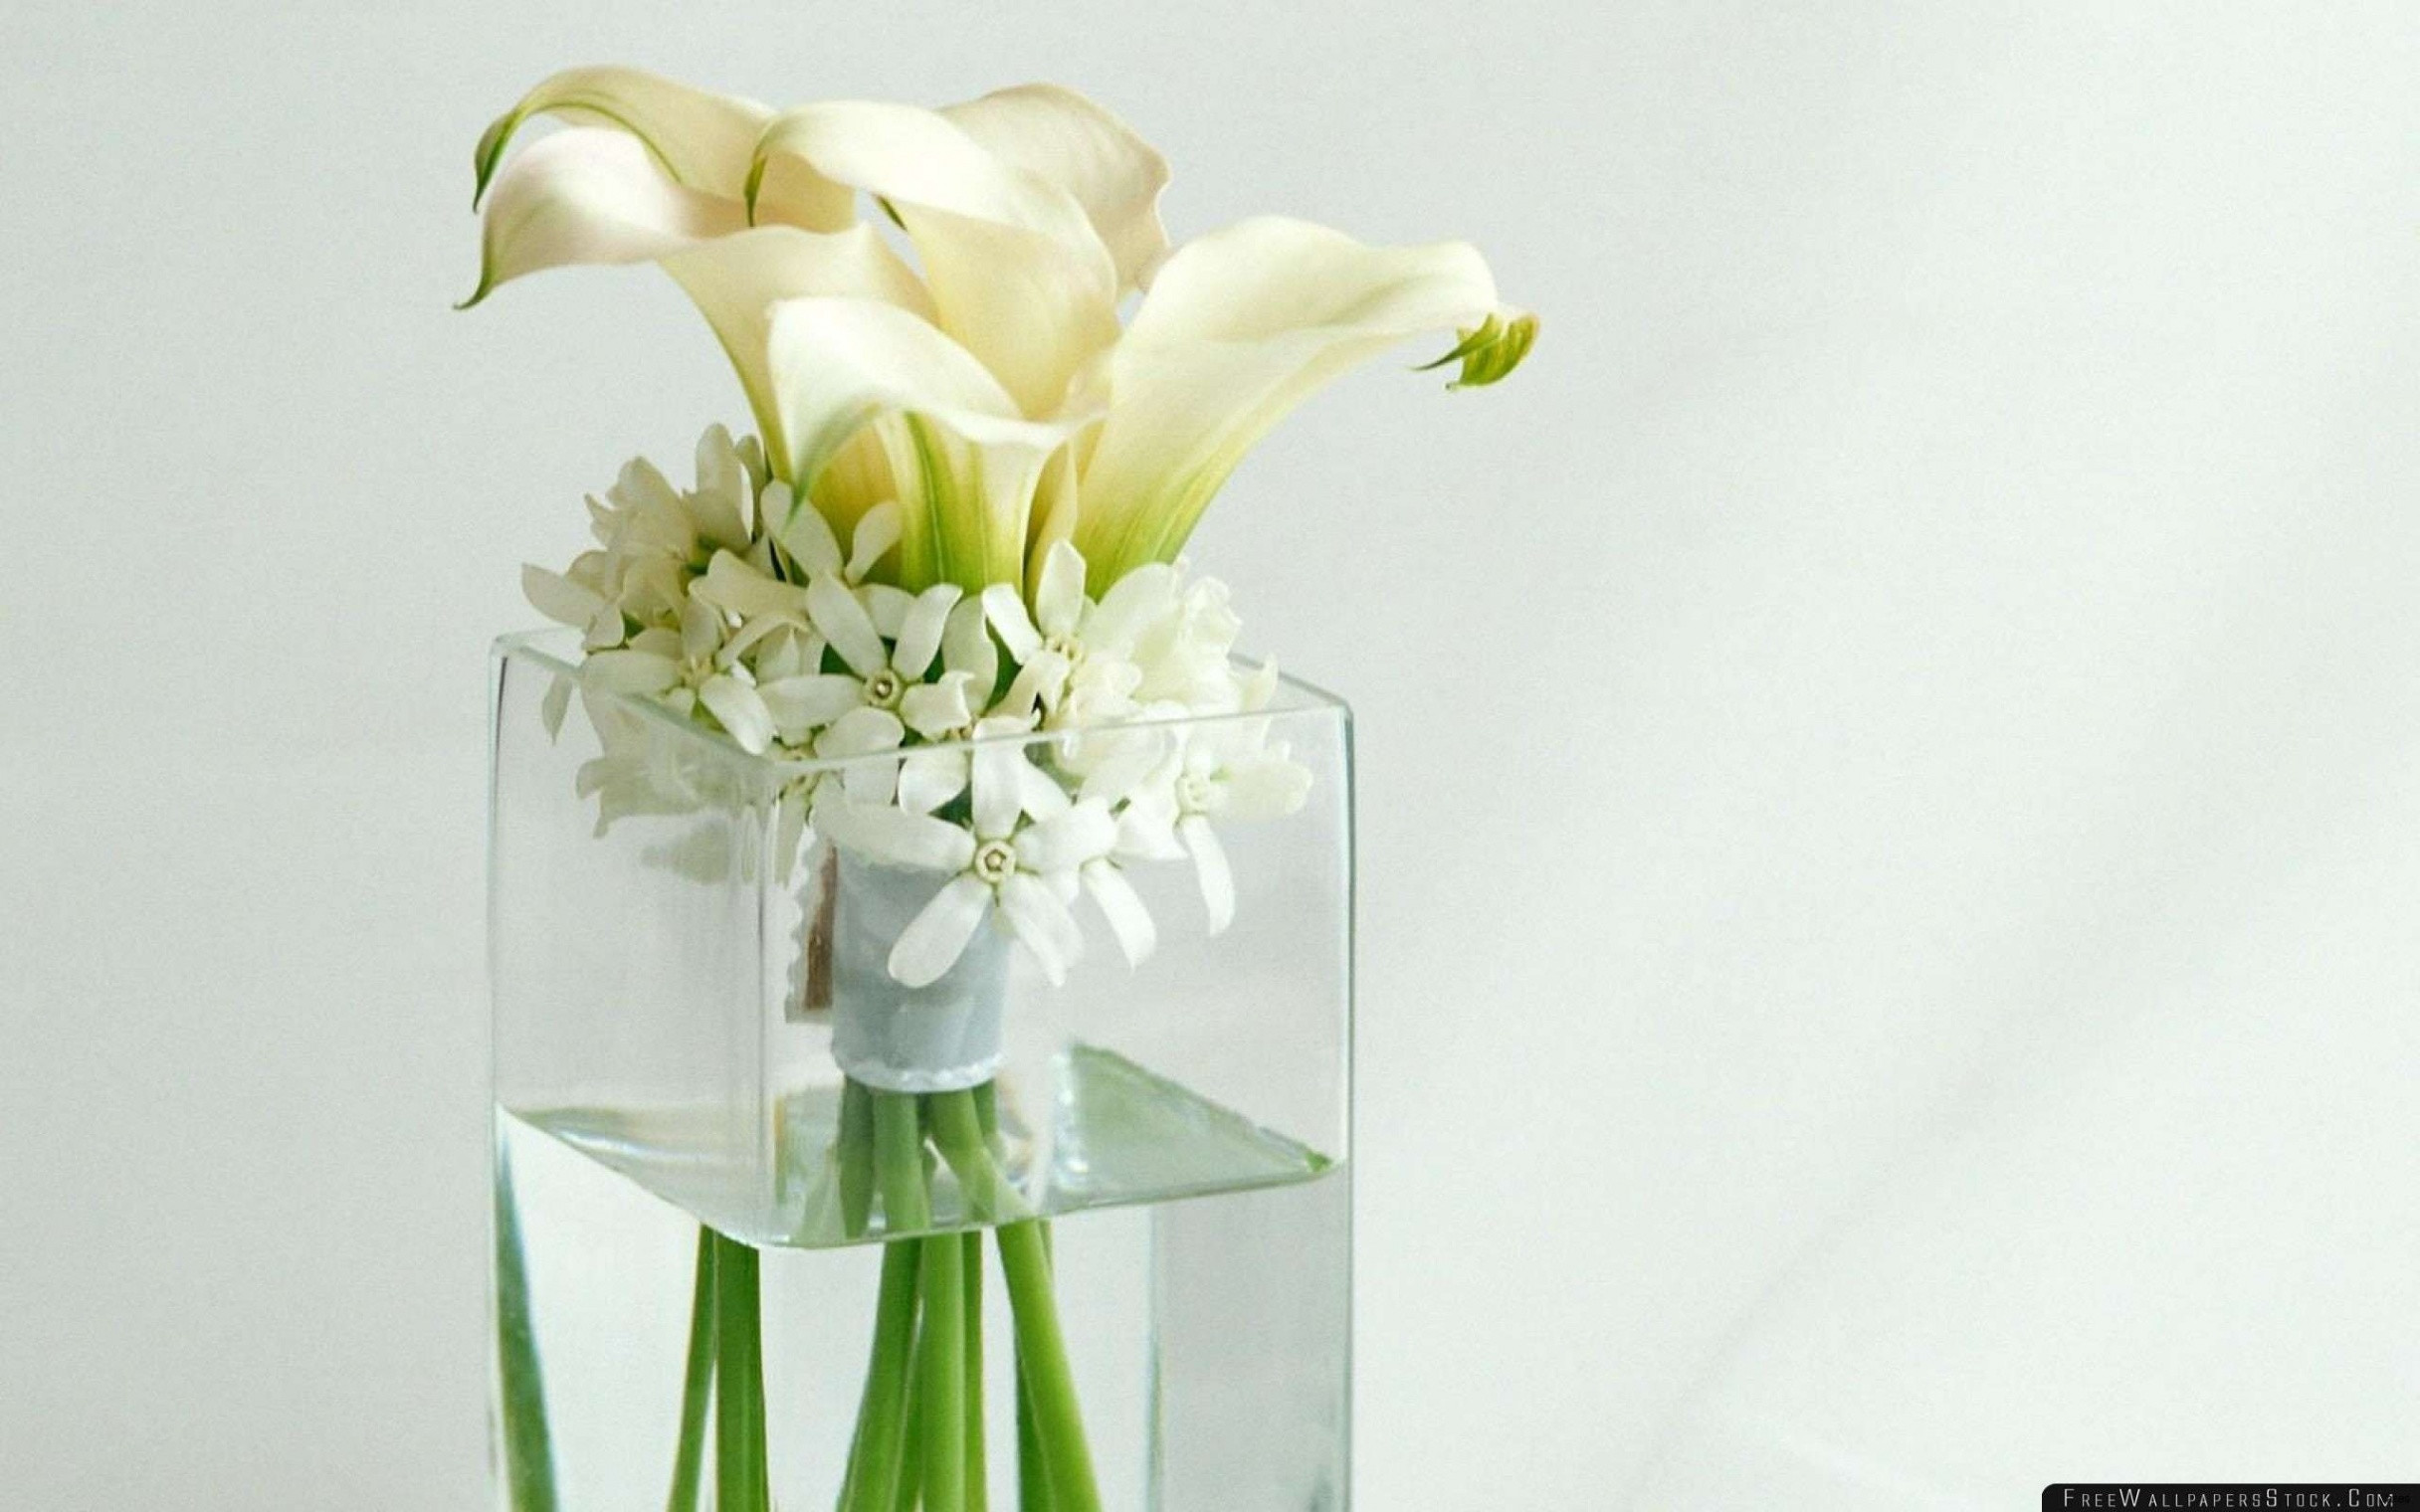 clear plastic vases for flowers of h vases for flower arrangements i 0d dry inspiration picture design with regard to image de tall vase centerpiece ideas vases flowers in water 0d artificial vase blanc